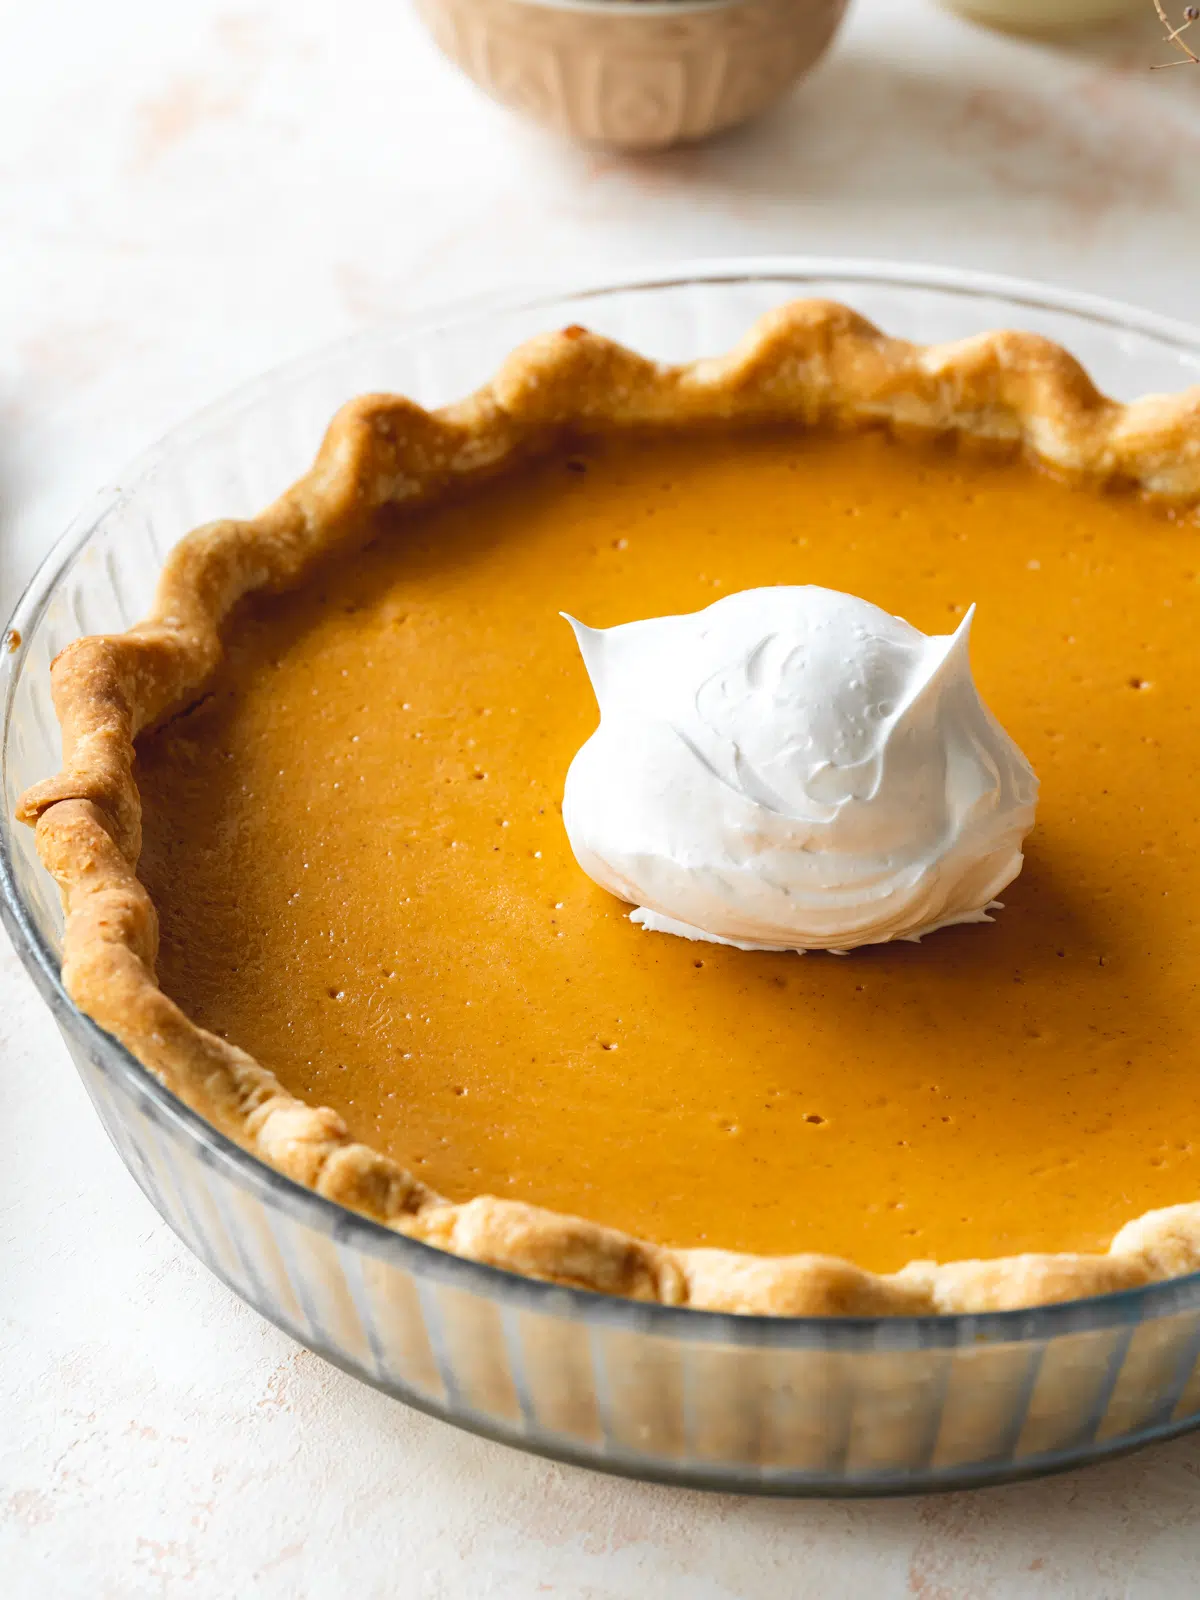 sweet potato pie with a scoop of Italian meringue on top in a clear pie dish.